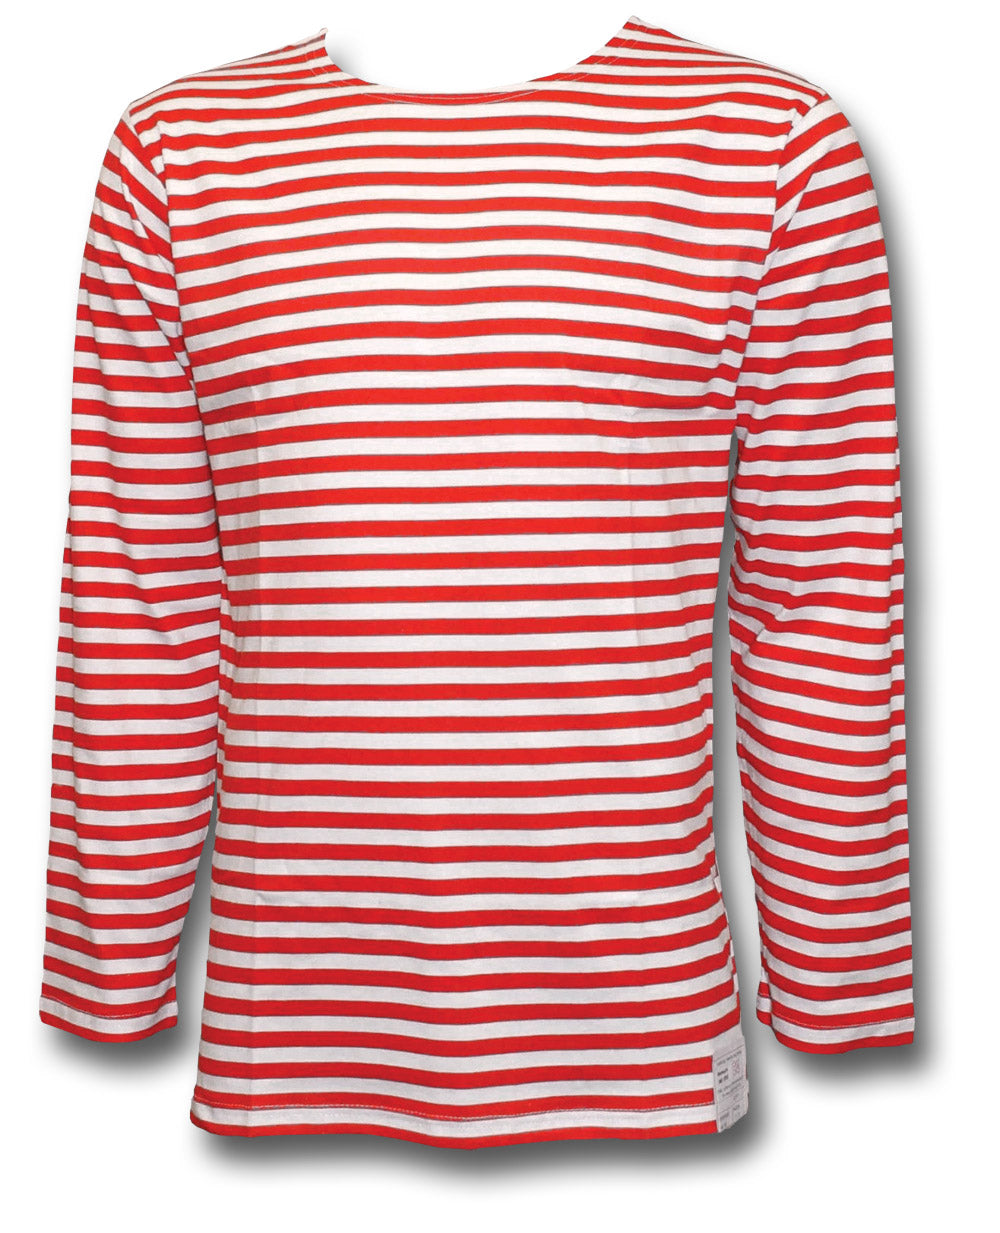 RUSSIAN STRIPED LONG SLEEVE SHIRT - RED